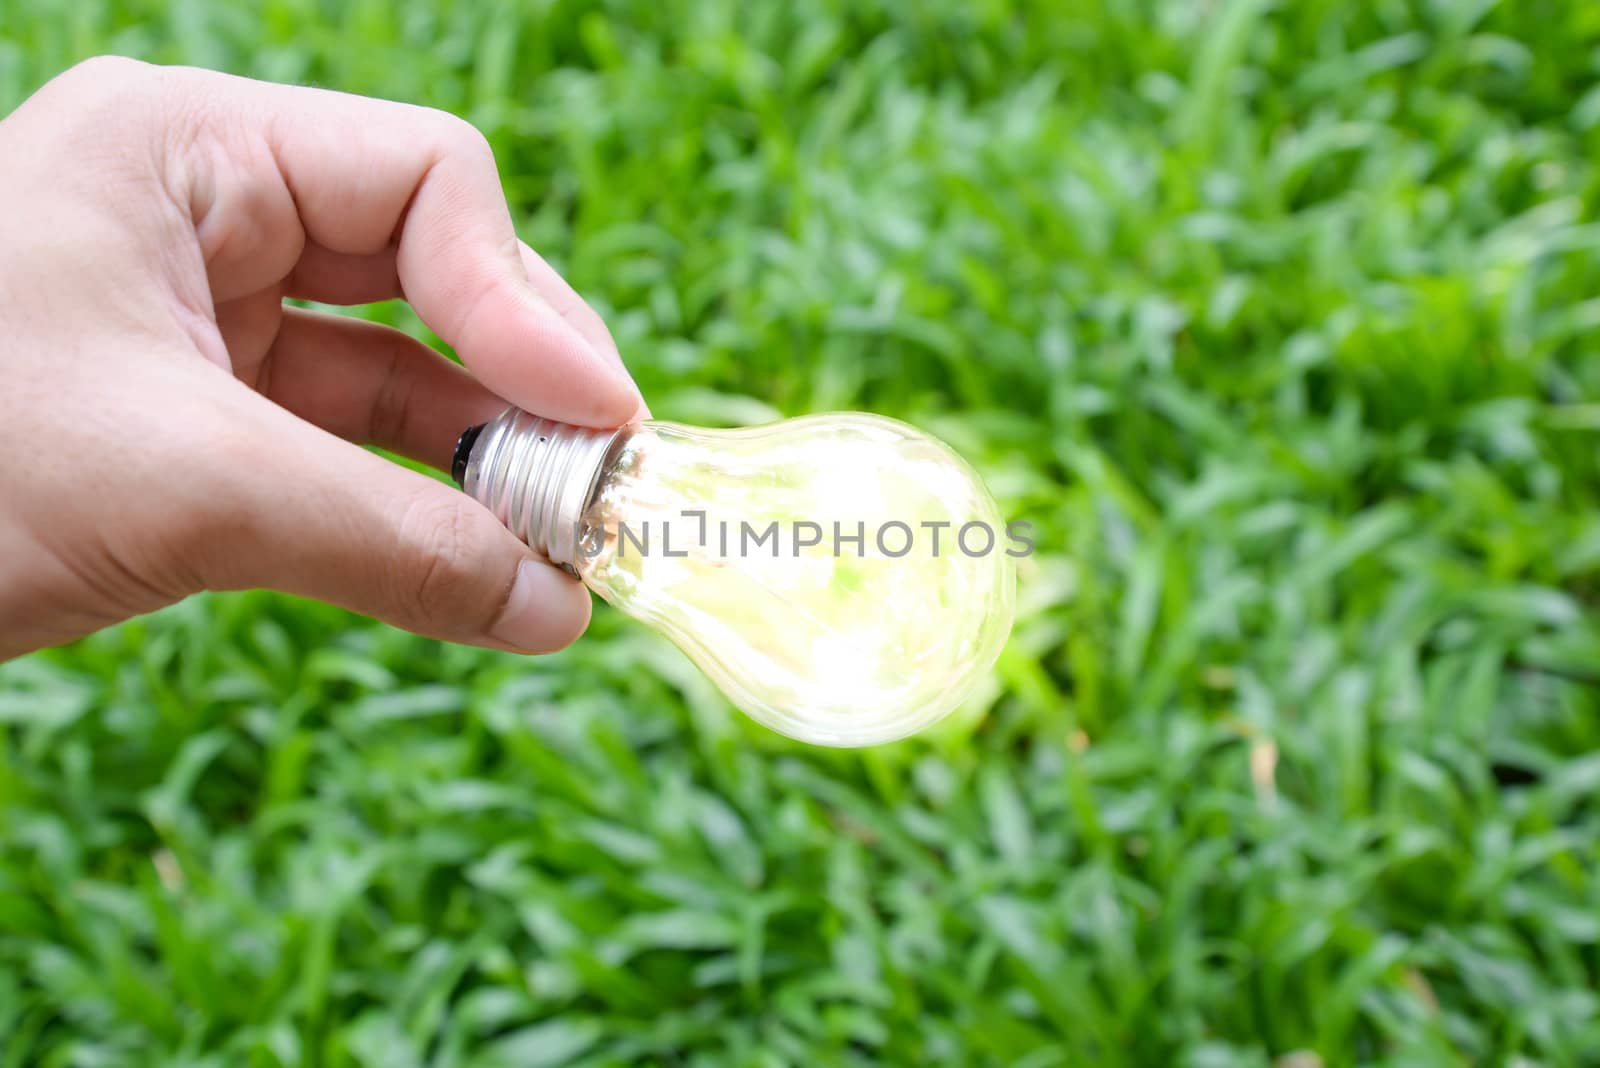 Hand hold incandescent bulb with lighting by Magneticmcc